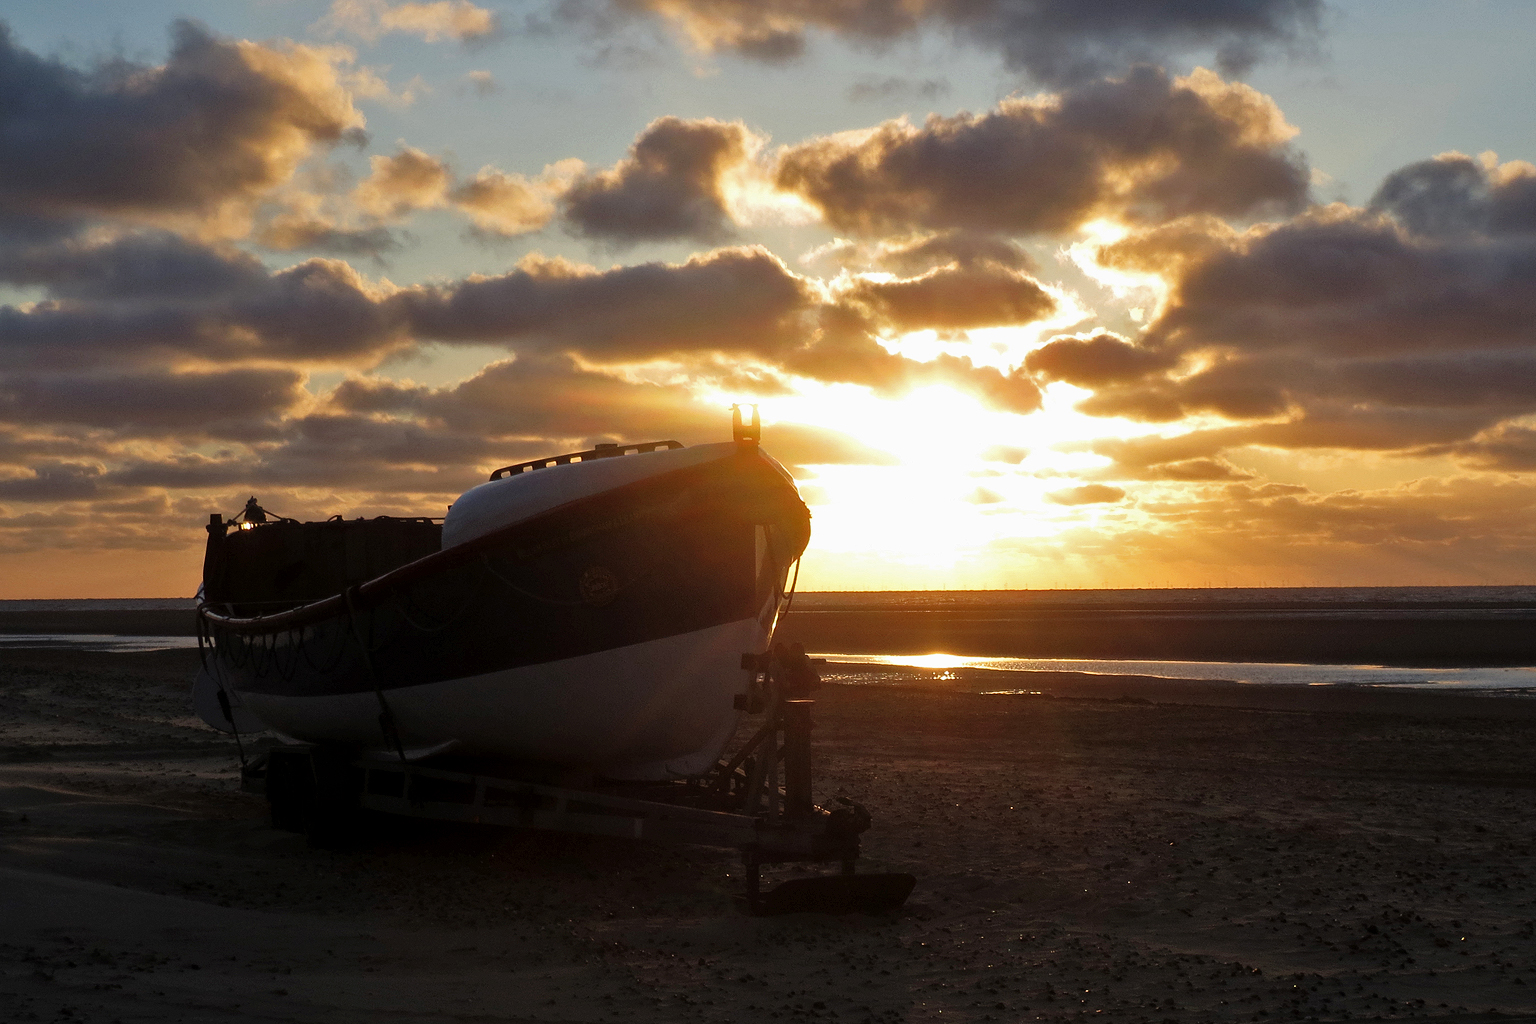 Former Whitby 32ft Ruby class lifeboat 'William Riley' on Wells beach for filming for a Lloyds bank advertisement, 8/6/2015